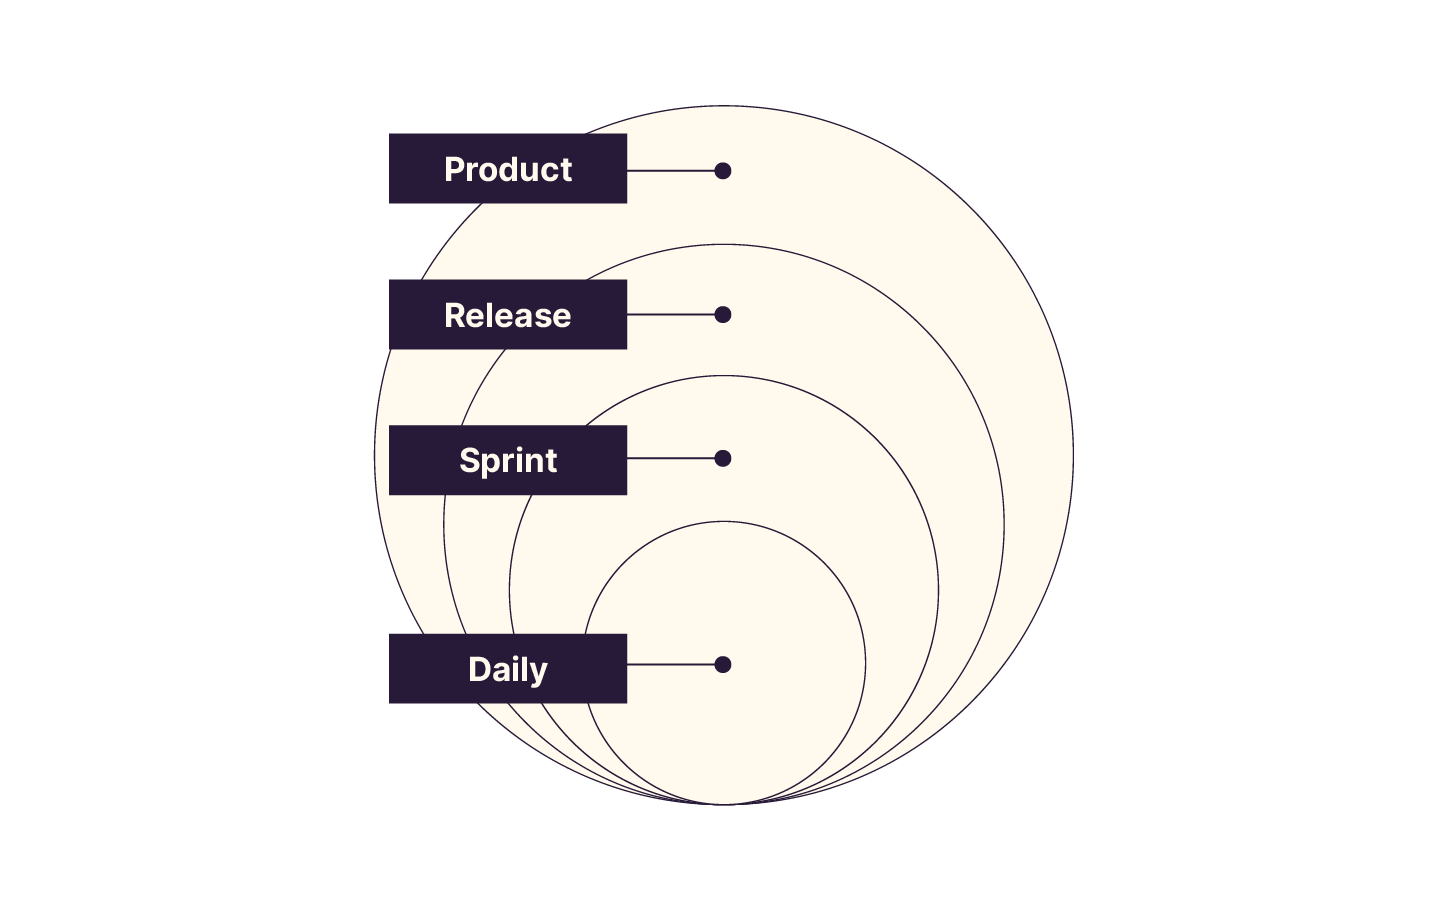 A diagram known as 'The Planning Onion.' It consists of concentric circles representing layers of planning frequency in Agile methodology, from the outermost 'Product' layer, followed by 'Release,' 'Sprint,' to the innermost 'Daily' layer.